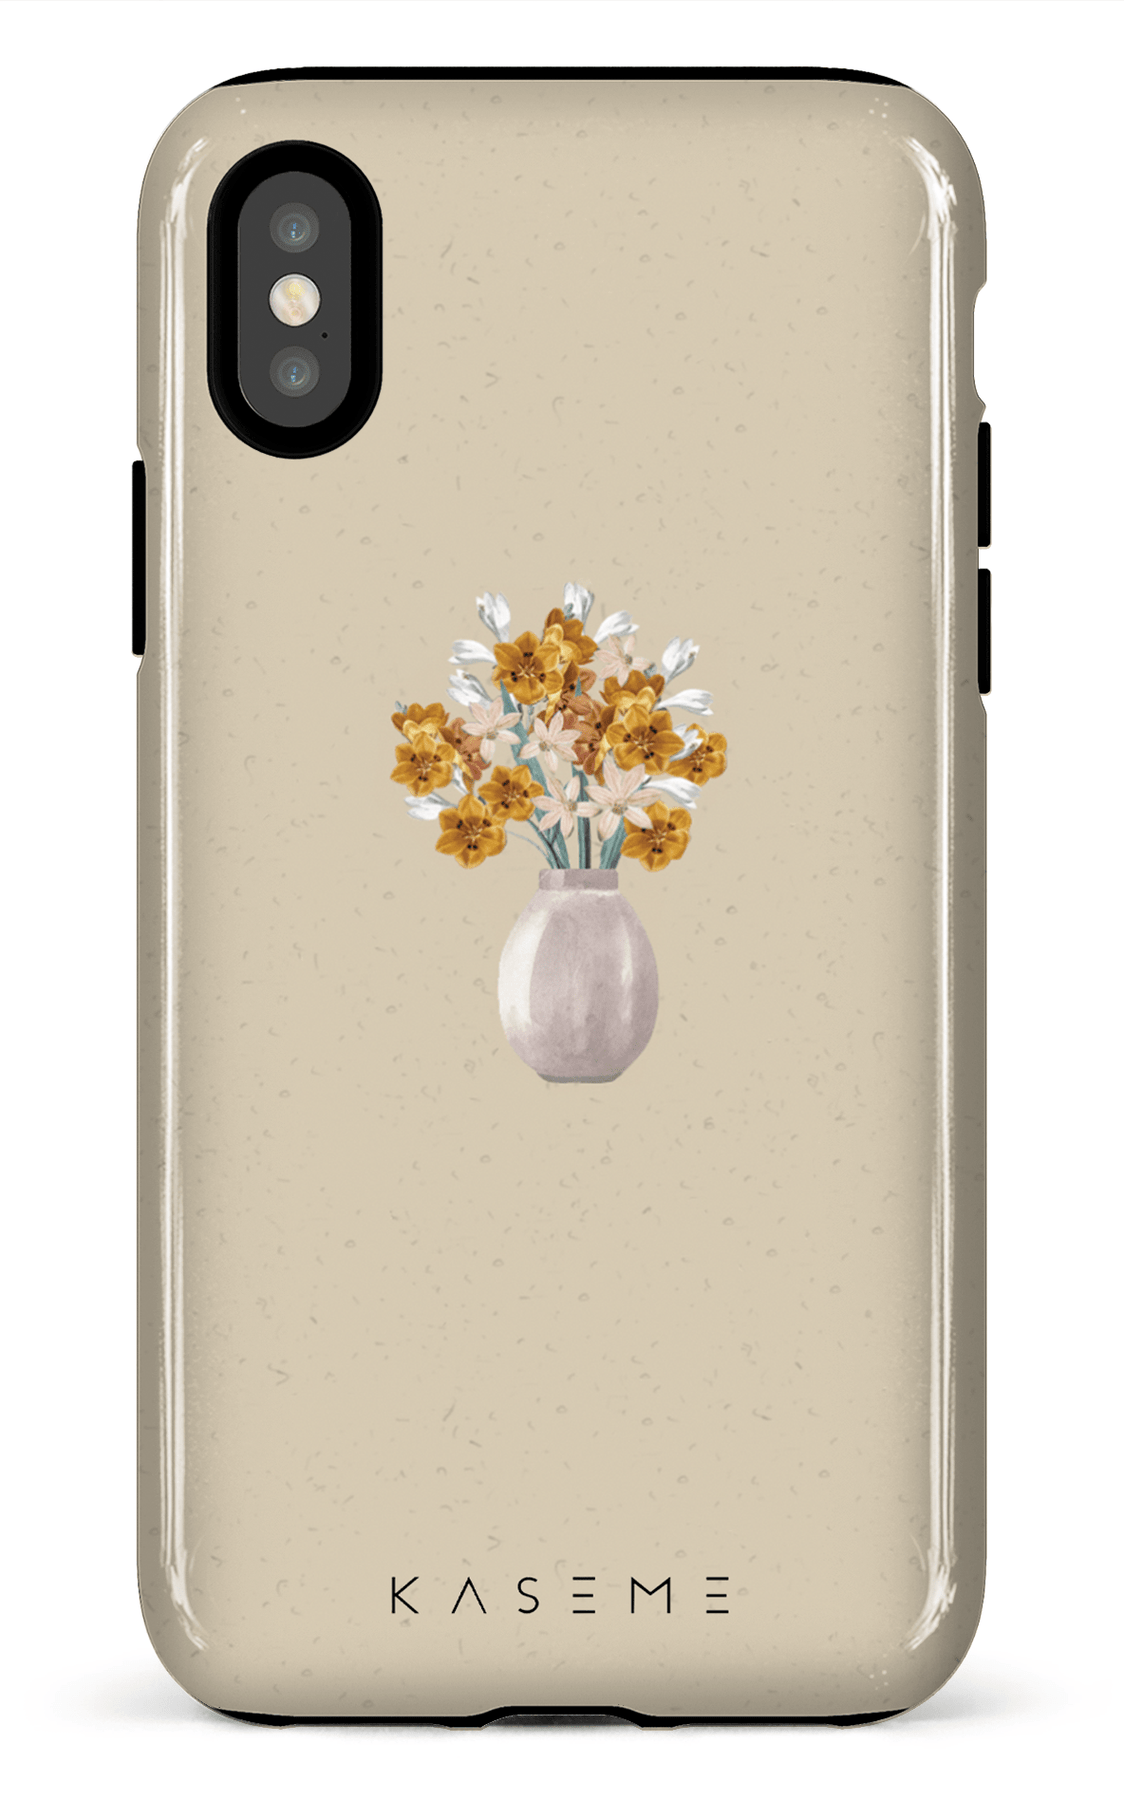 Cases - Fall blooming by Sarah Couture